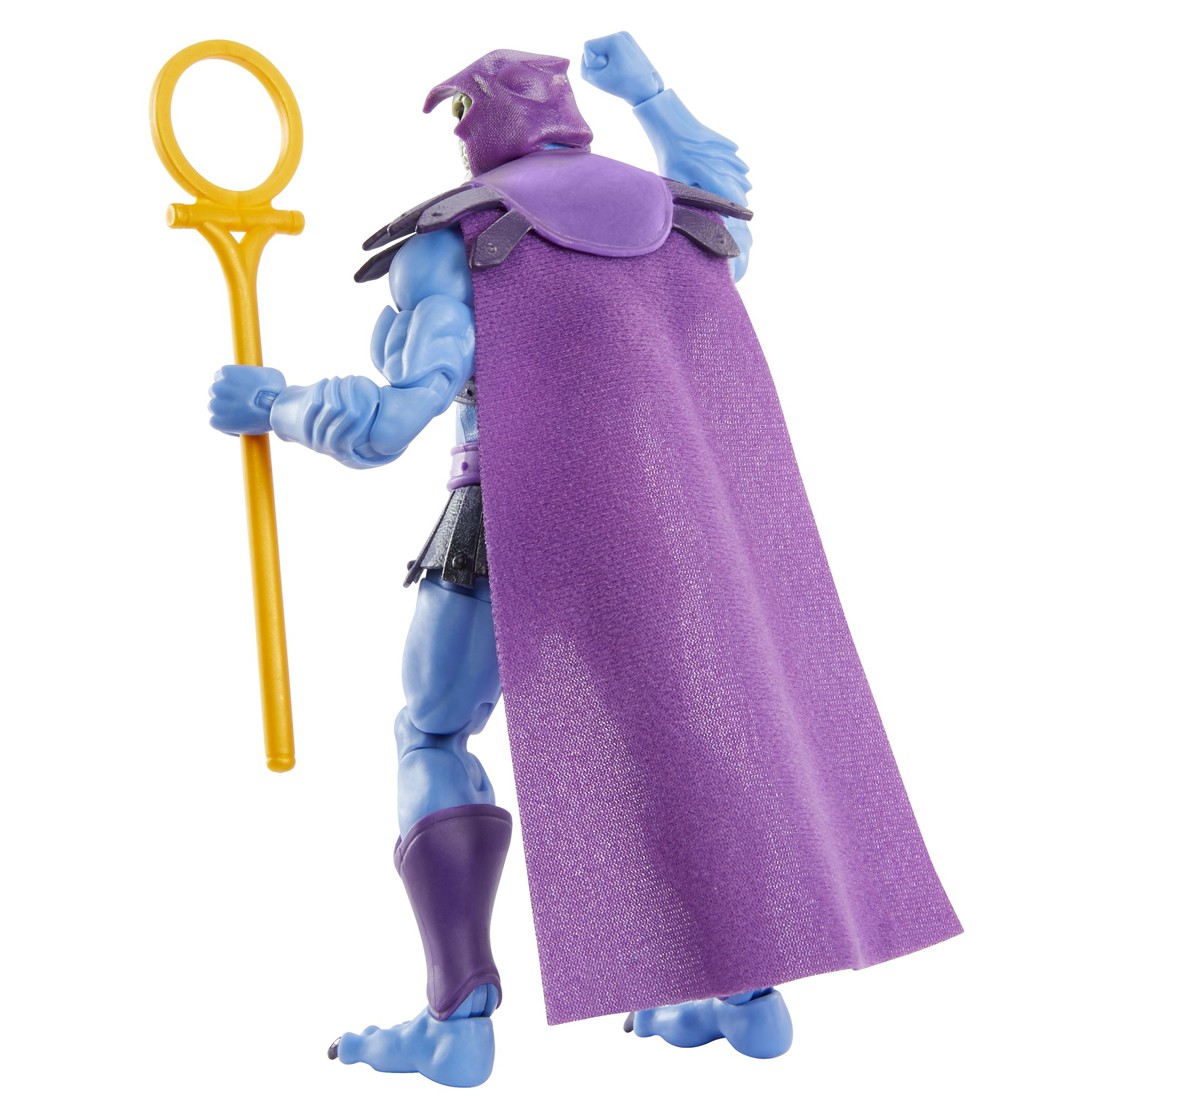 Motu Masters Of The Universe Masterverse Collection, 7-In Battle Figure - Skeletor For Storytelling Play And Display, 6Y+, Multicolour